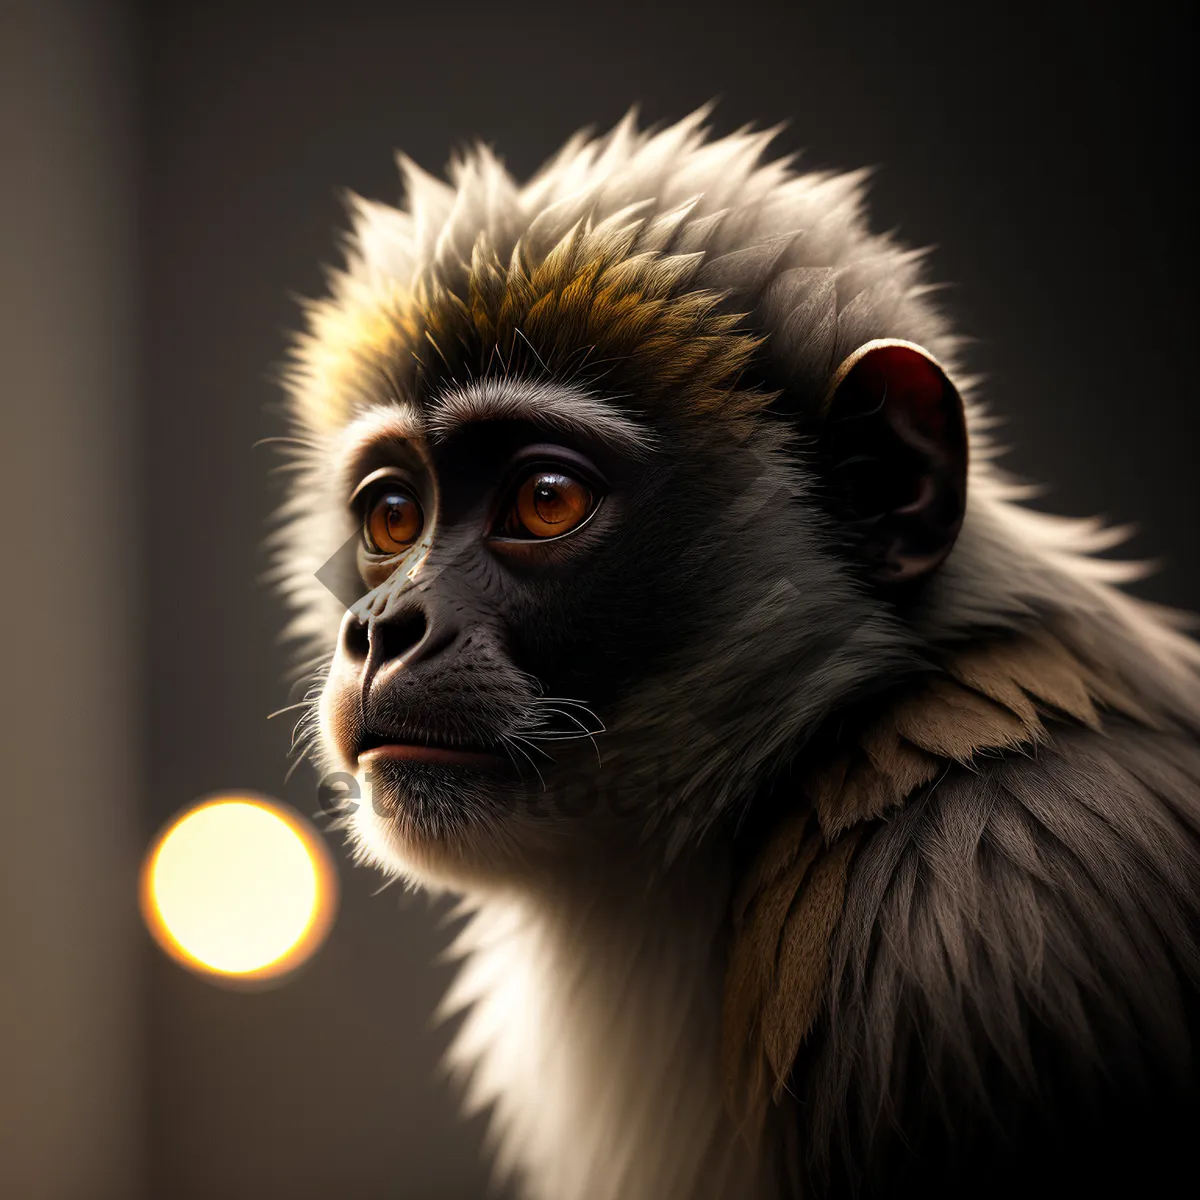 Picture of Cute Primate with Intense Black Eyes